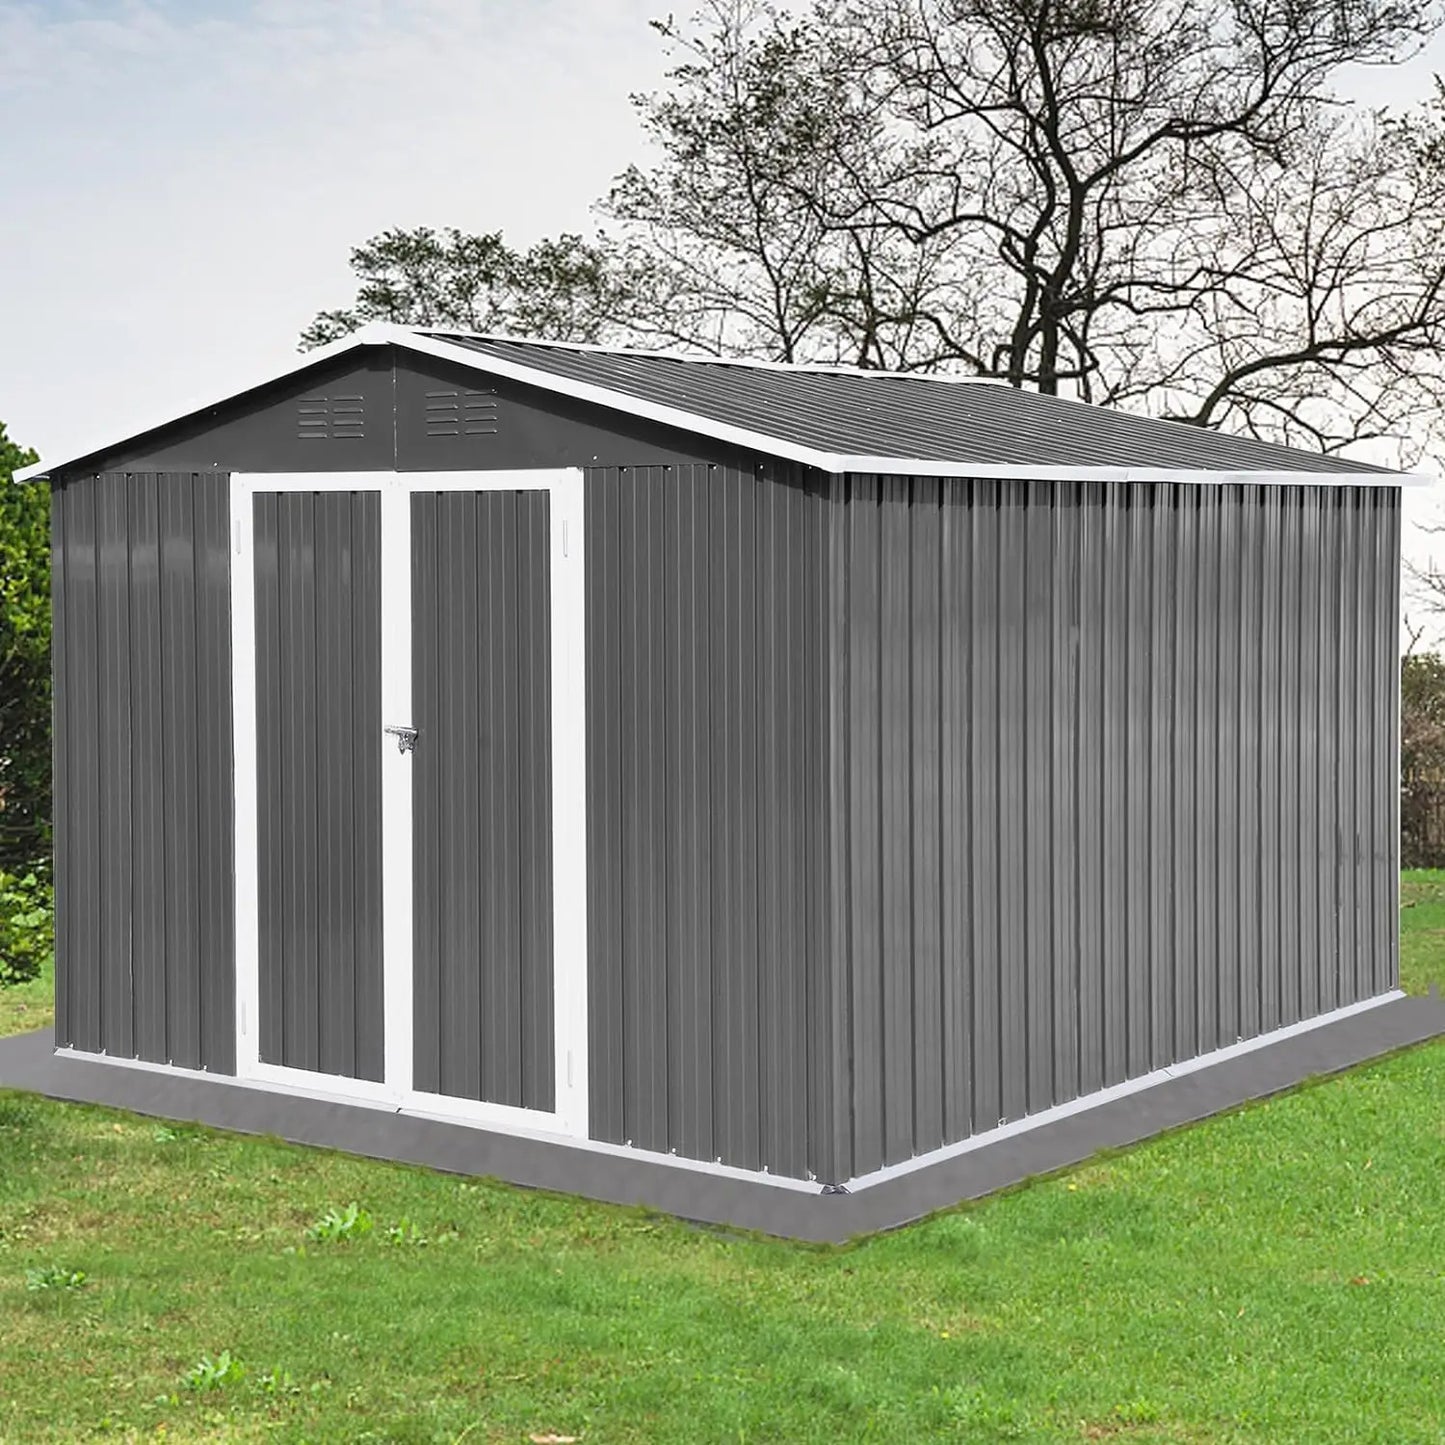 Outdoor Storage Shed with Lockable Doors for Backyard Lawn Garden 10ftx8ft Metal Outdoor Galvanized Steel Storage Shed